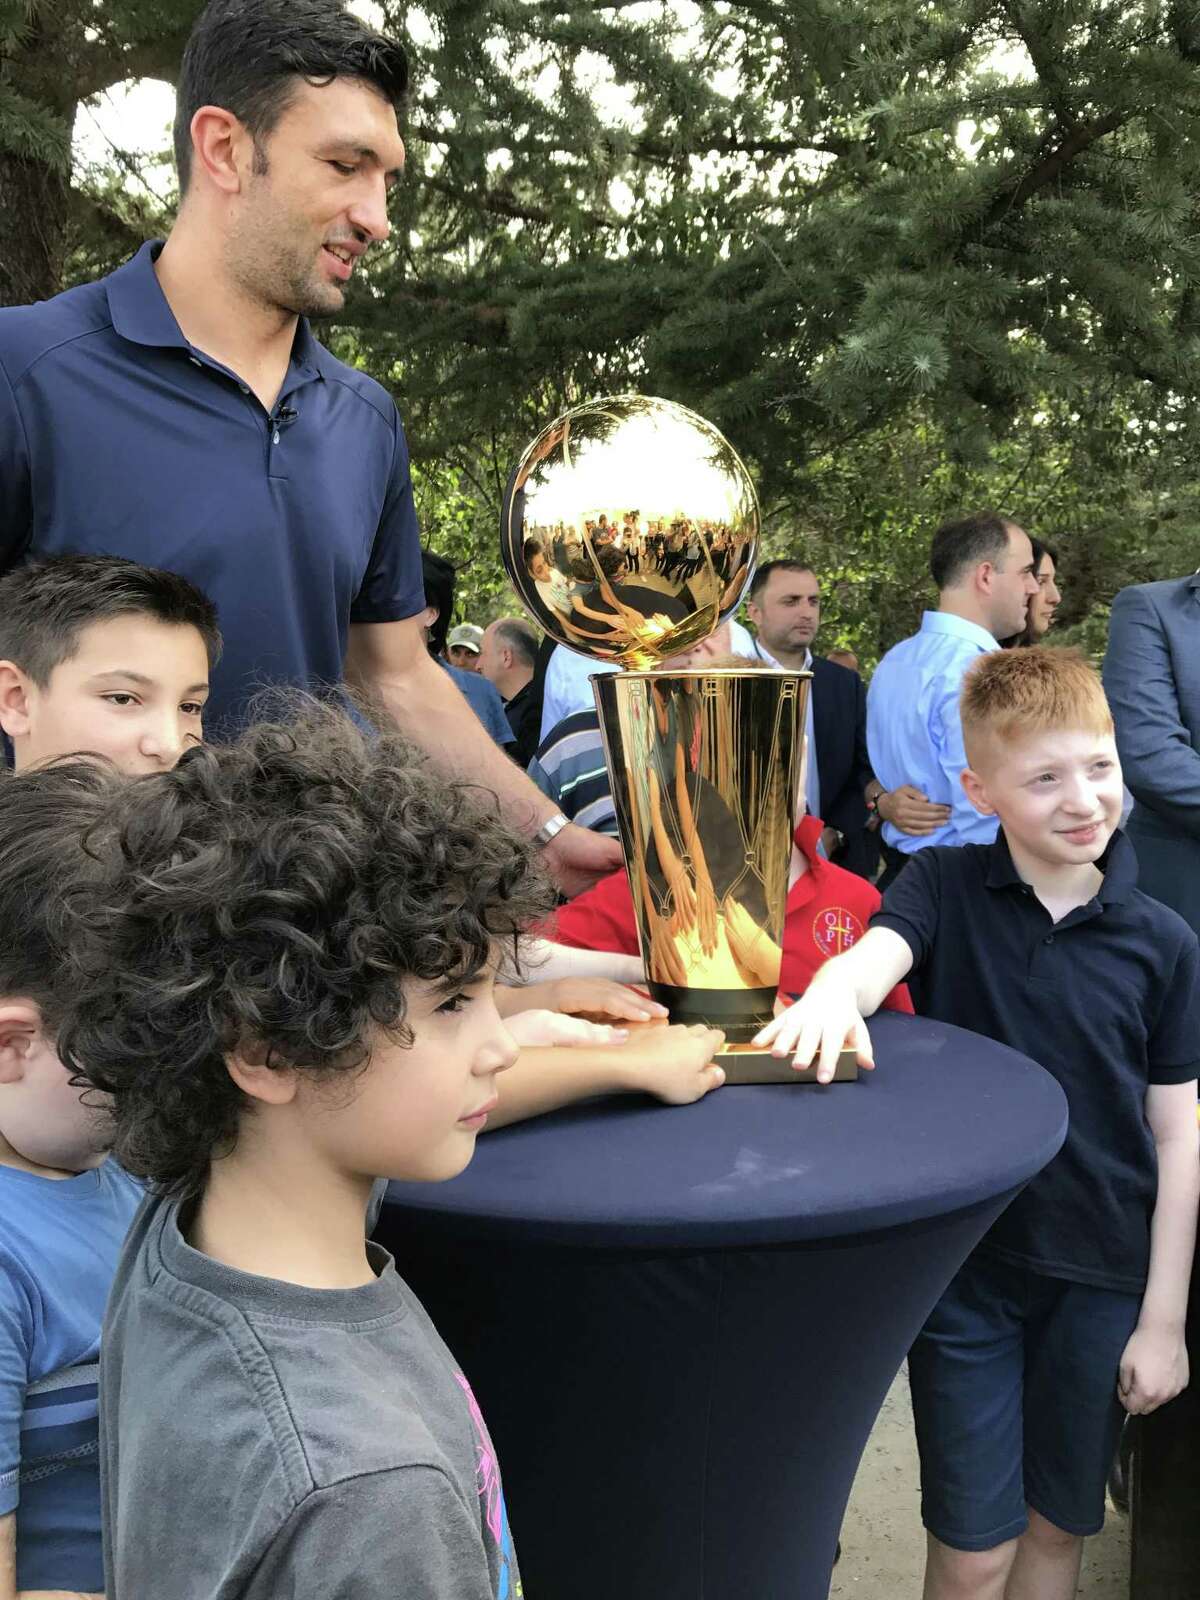 Tiffany Just Redesigned the Larry O'Brien NBA Finals Championship Trophy